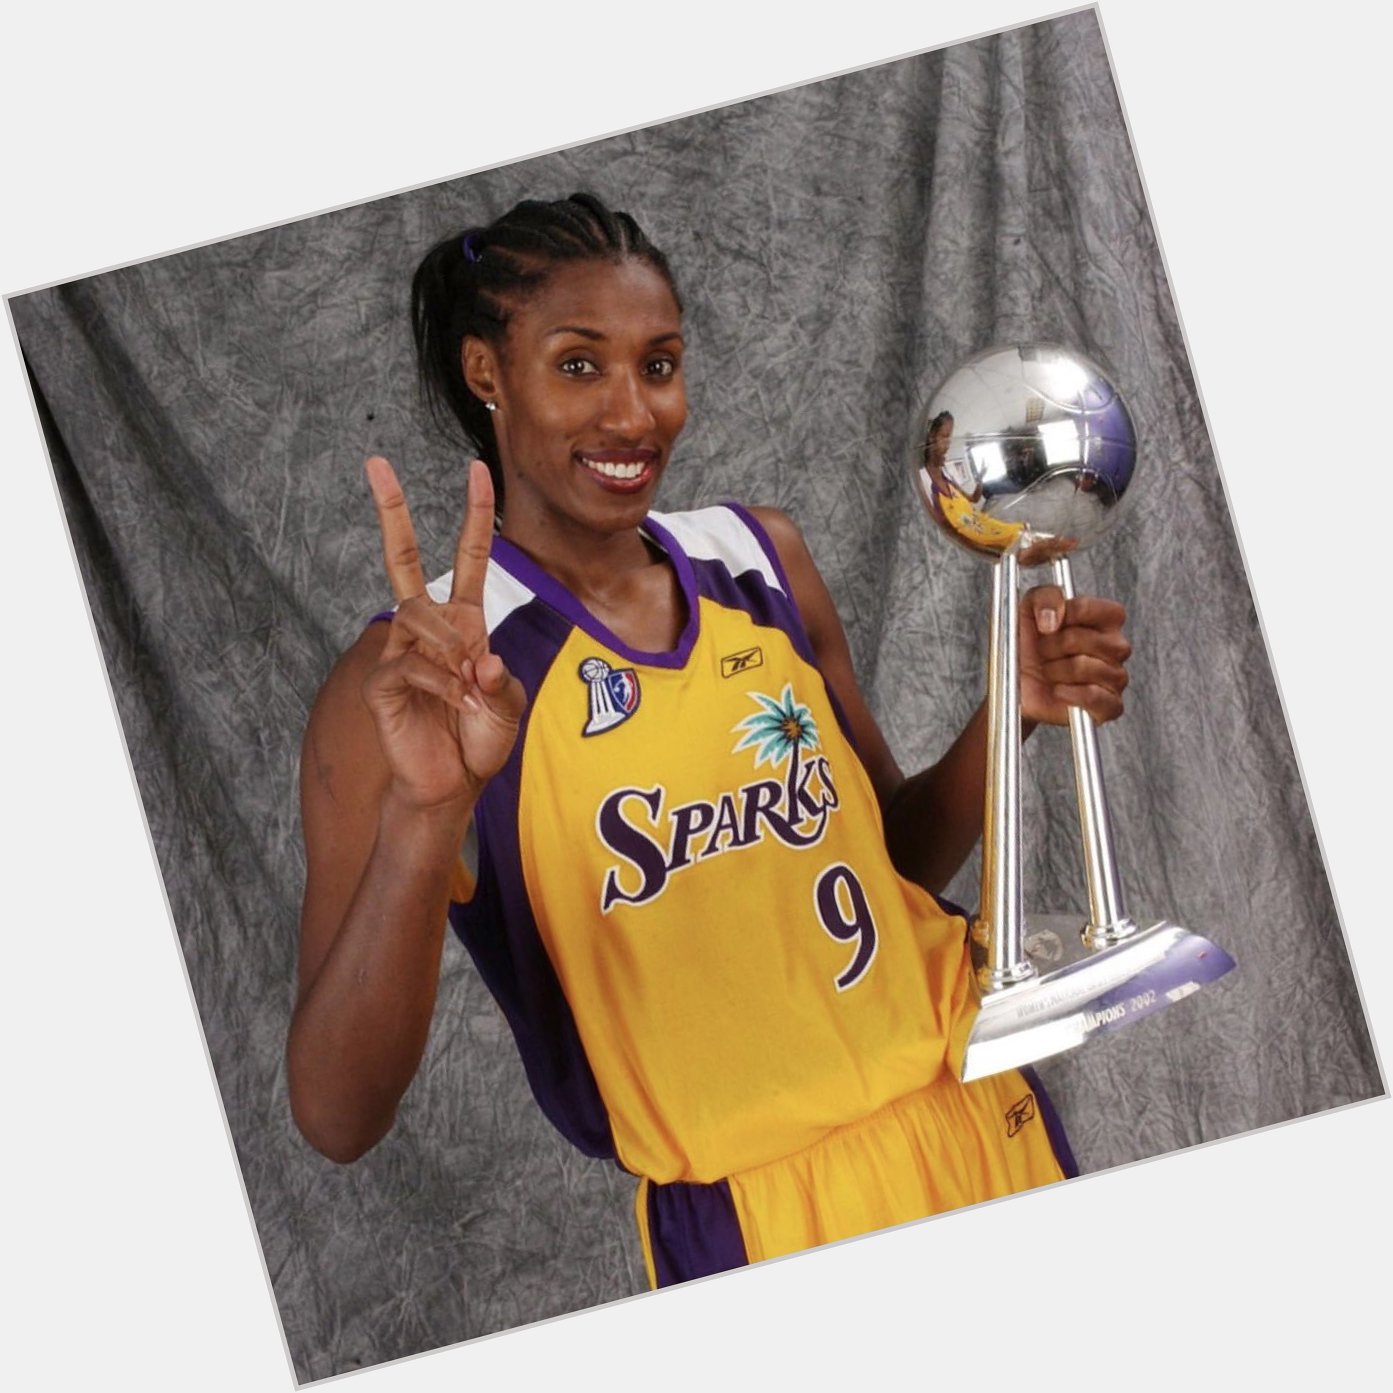 Join us in wishing WNBA LEGEND Lisa Leslie a very happy birthday 